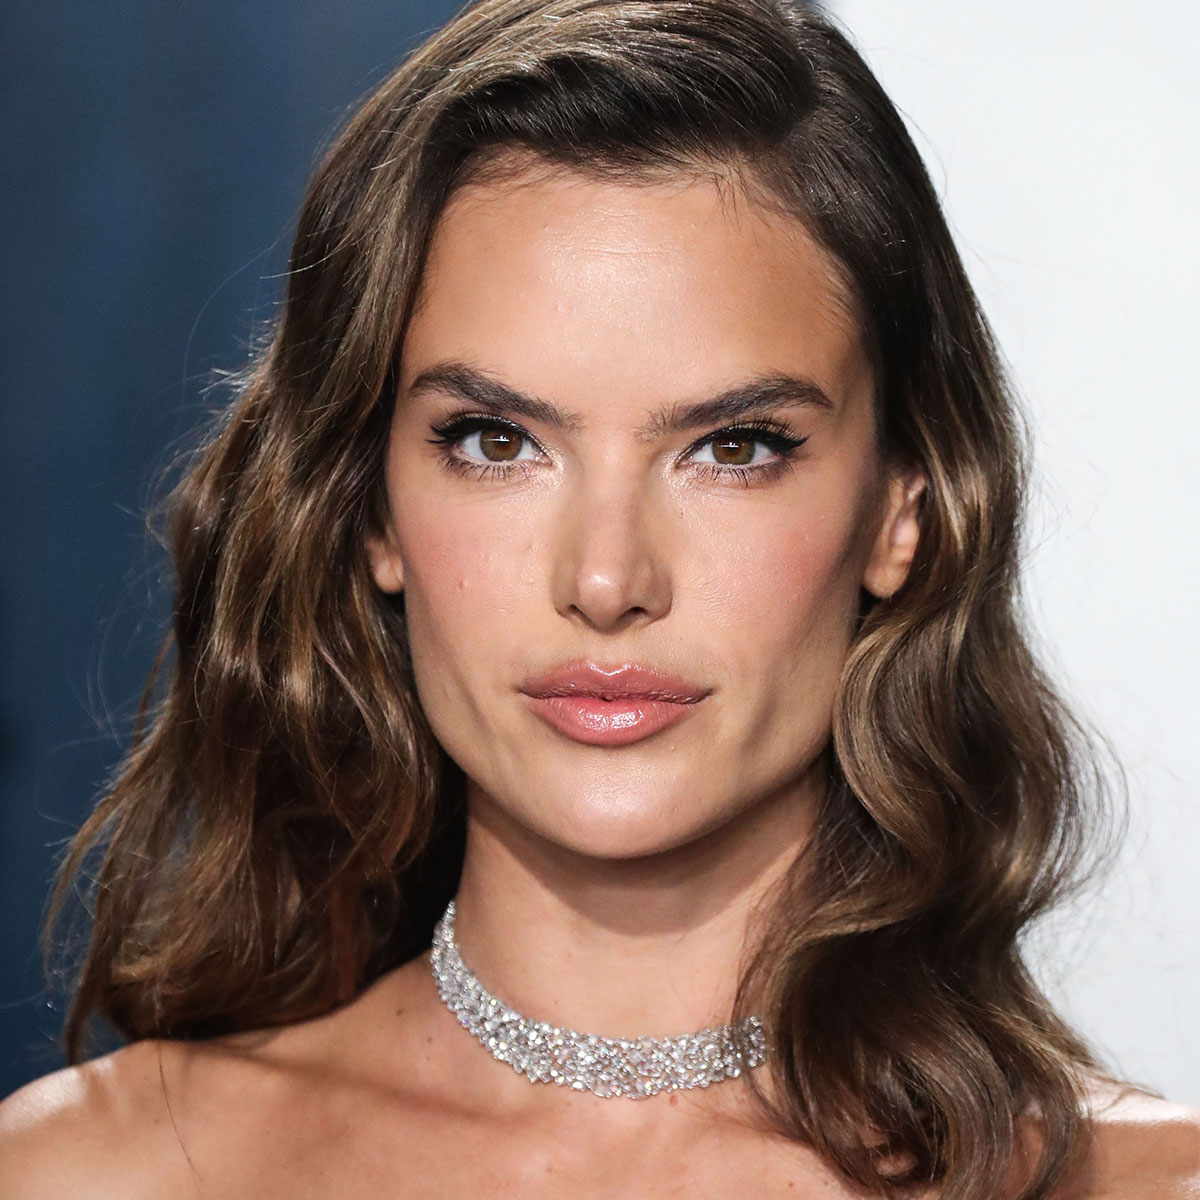 Alessandra Ambrosio Shows Off Her Long Legs And Ageless Figure In